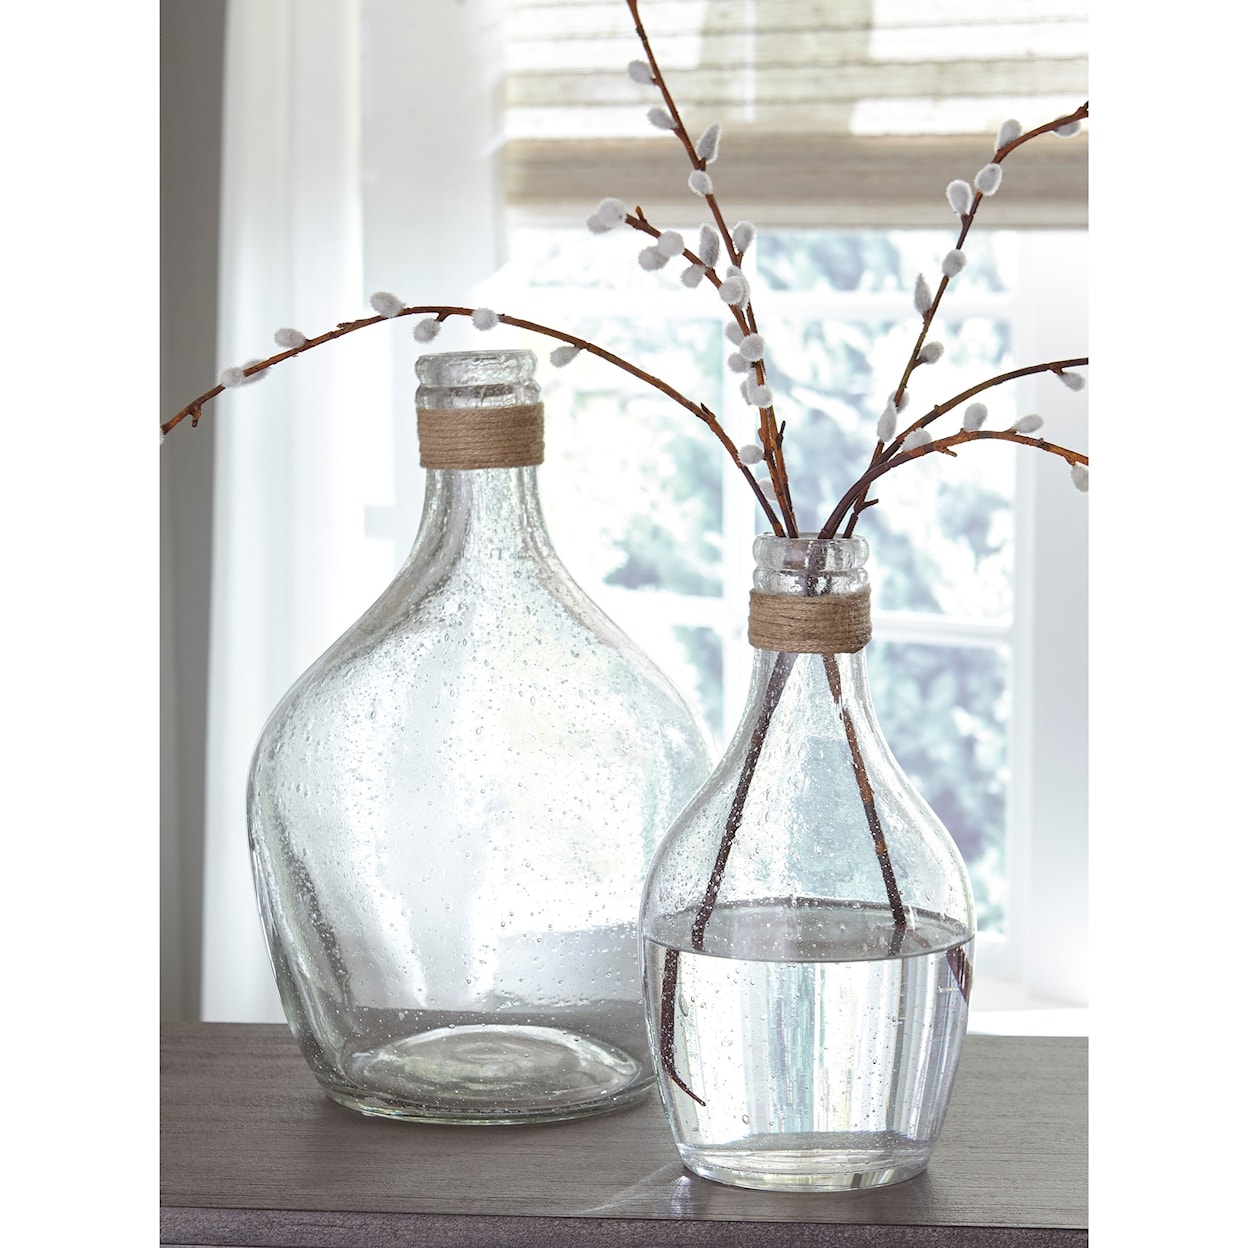 Benchcraft Accents Marcin Clear Glass Vase Set